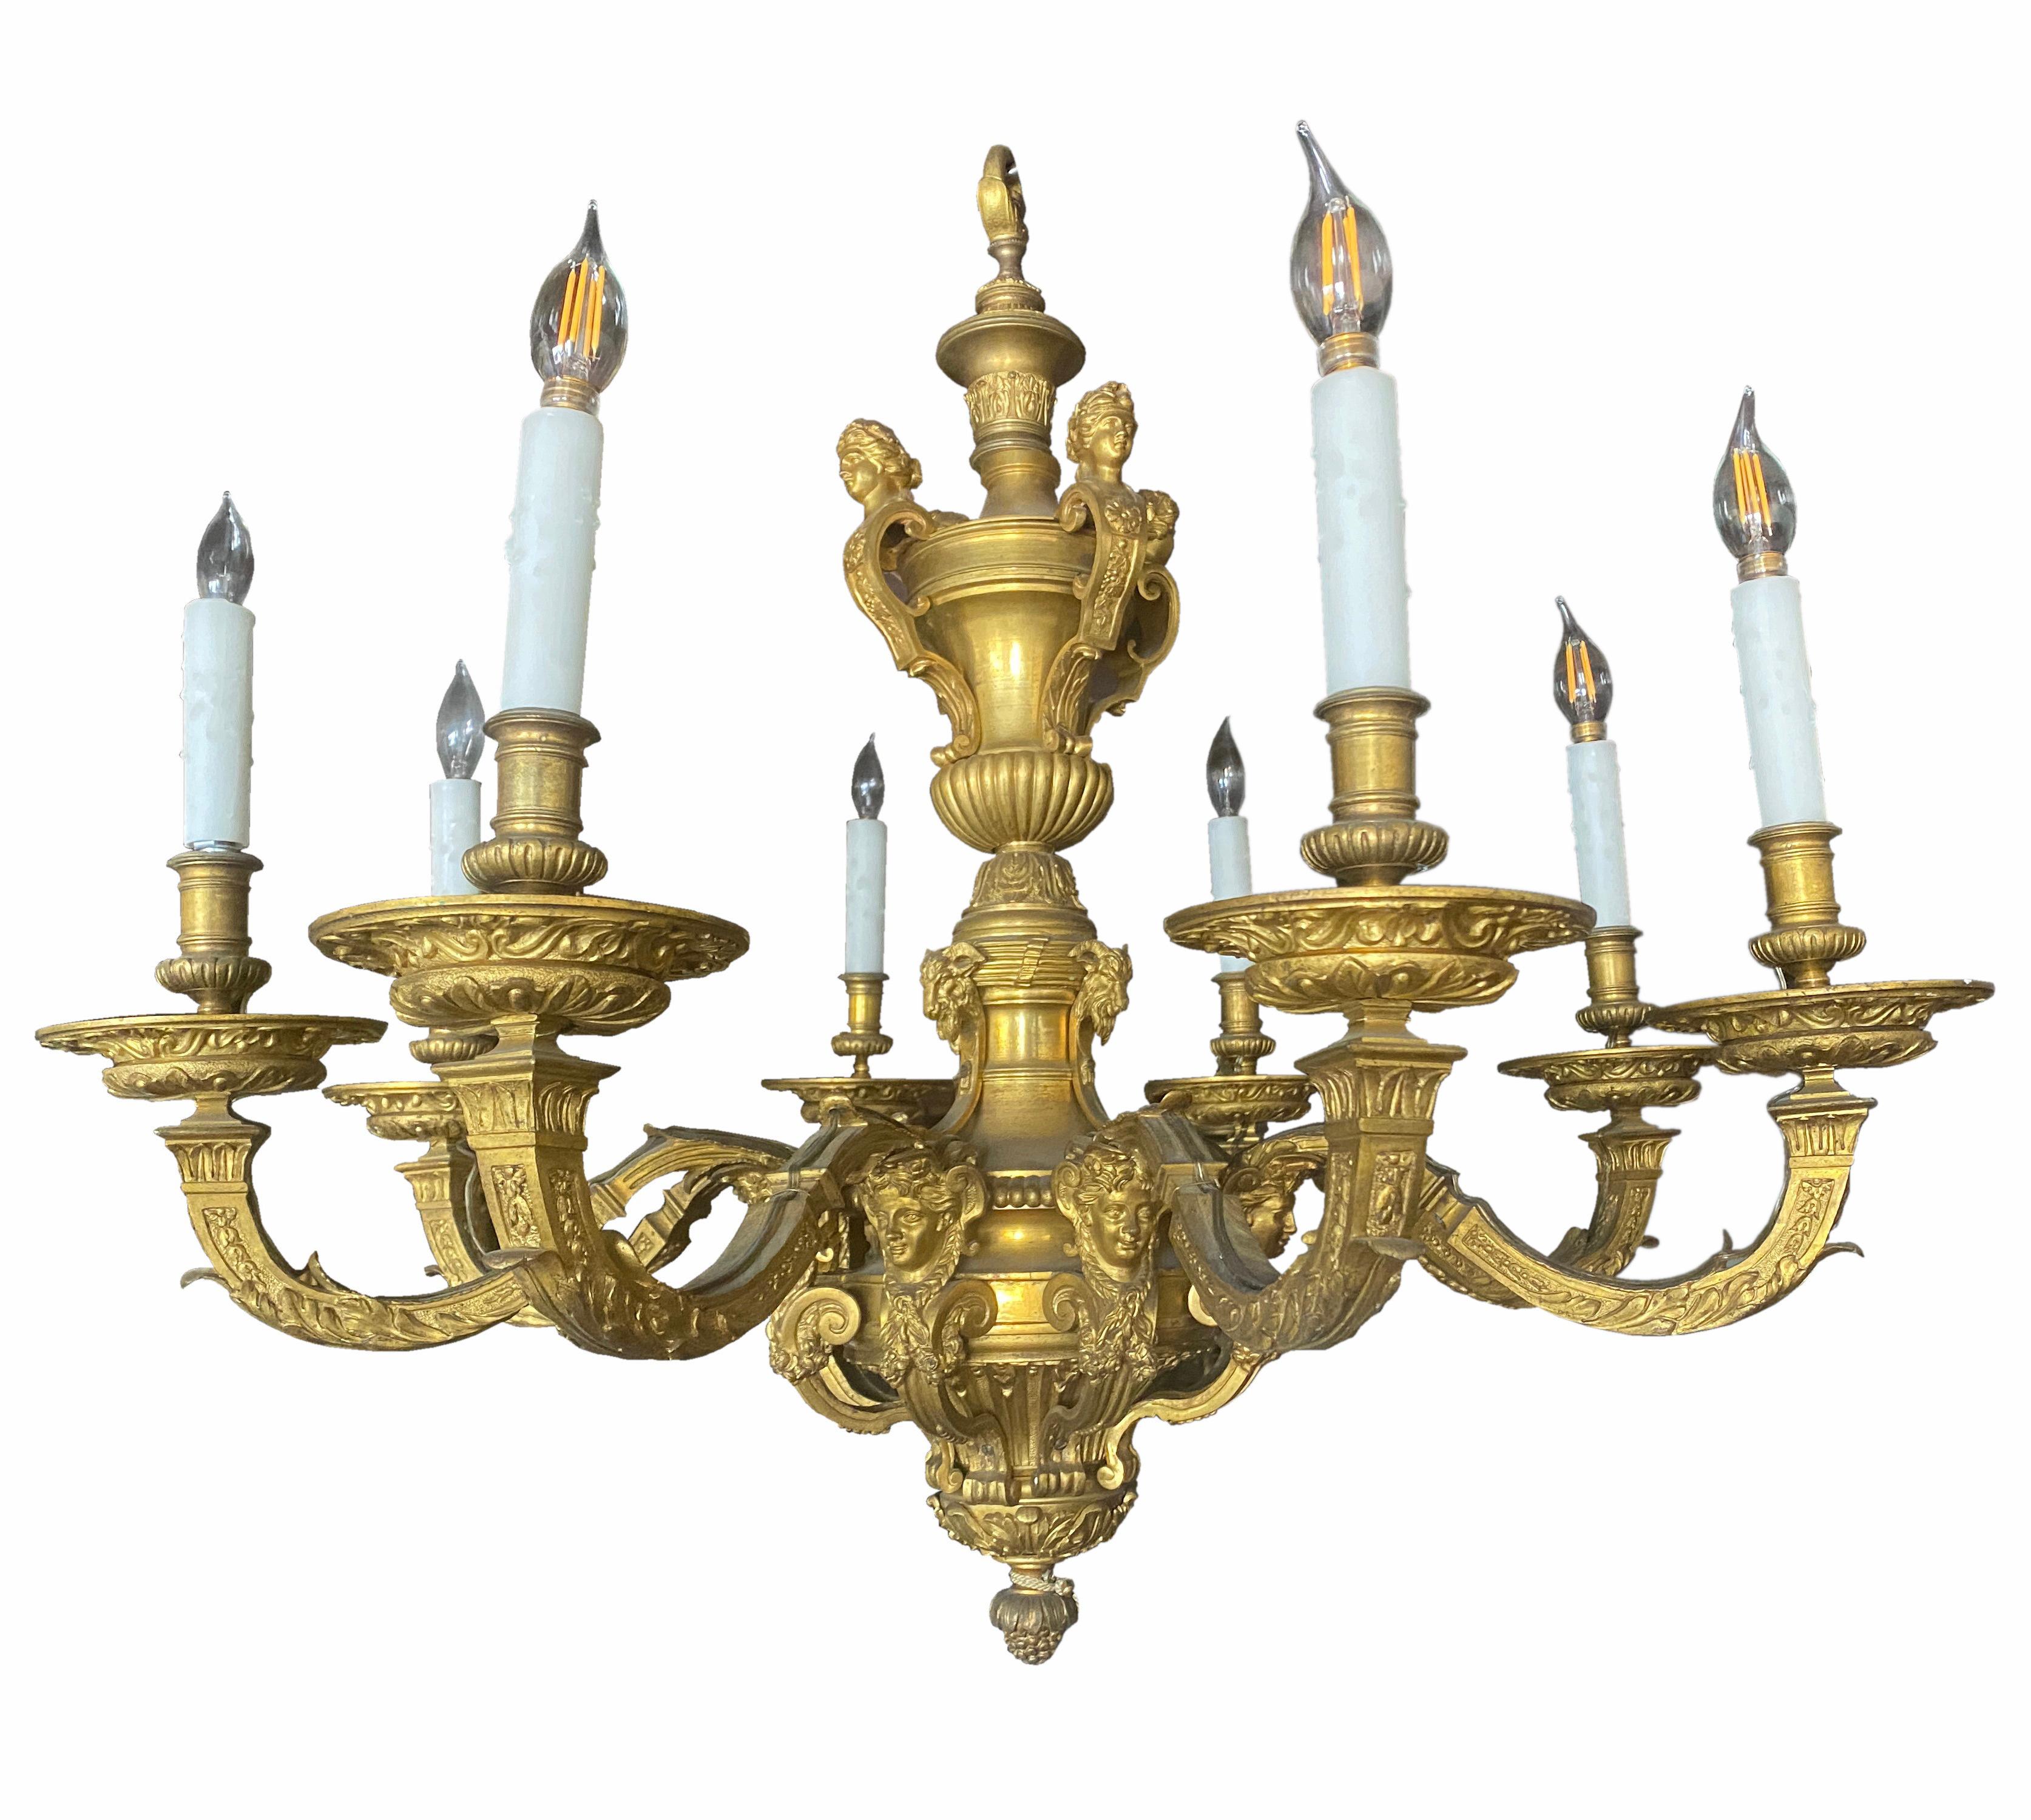 A Louis XVI style Ormolu eight-light gilt bronze chandelier, after the model by Andre-Charles Boulle,
French, 19th century. 
The urn-form baluster stem surmounted with putto terms, the spreading lower section issuing two tiers of scolling